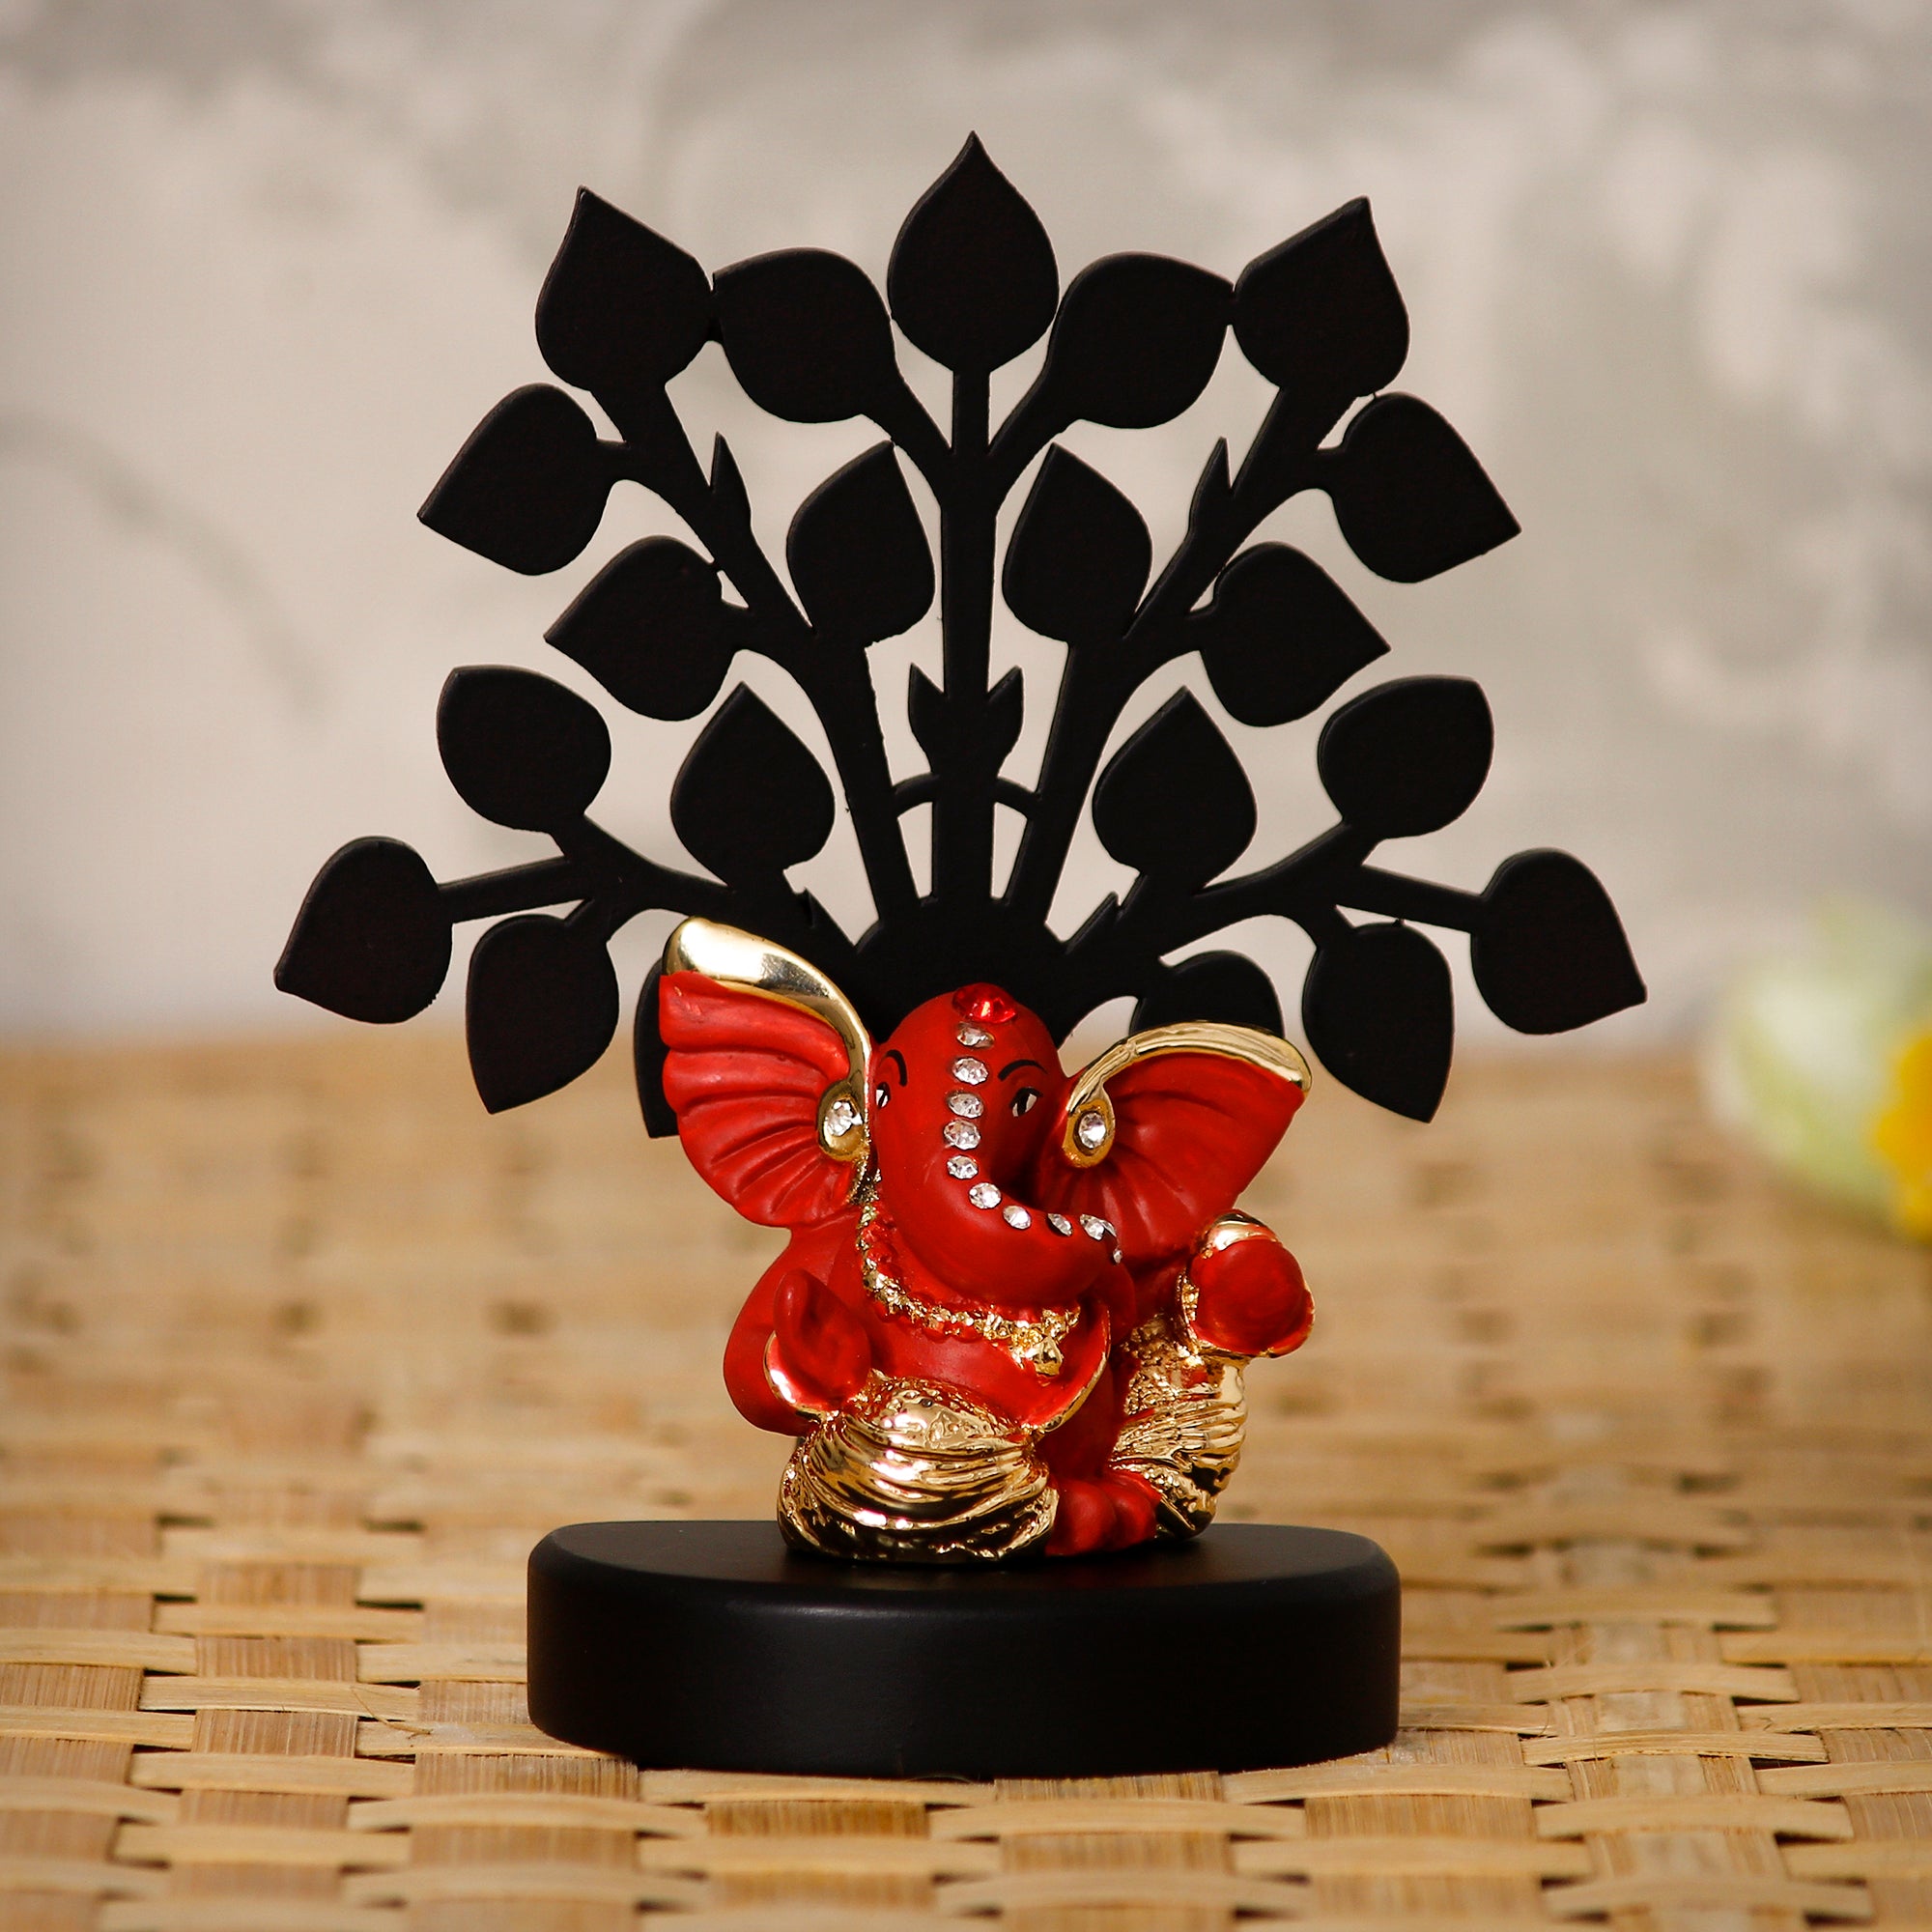 Gold Plated Orange Polyresin Ganesha Idol with Wooden Tree for Home, Temple, Office and Car Dashboard